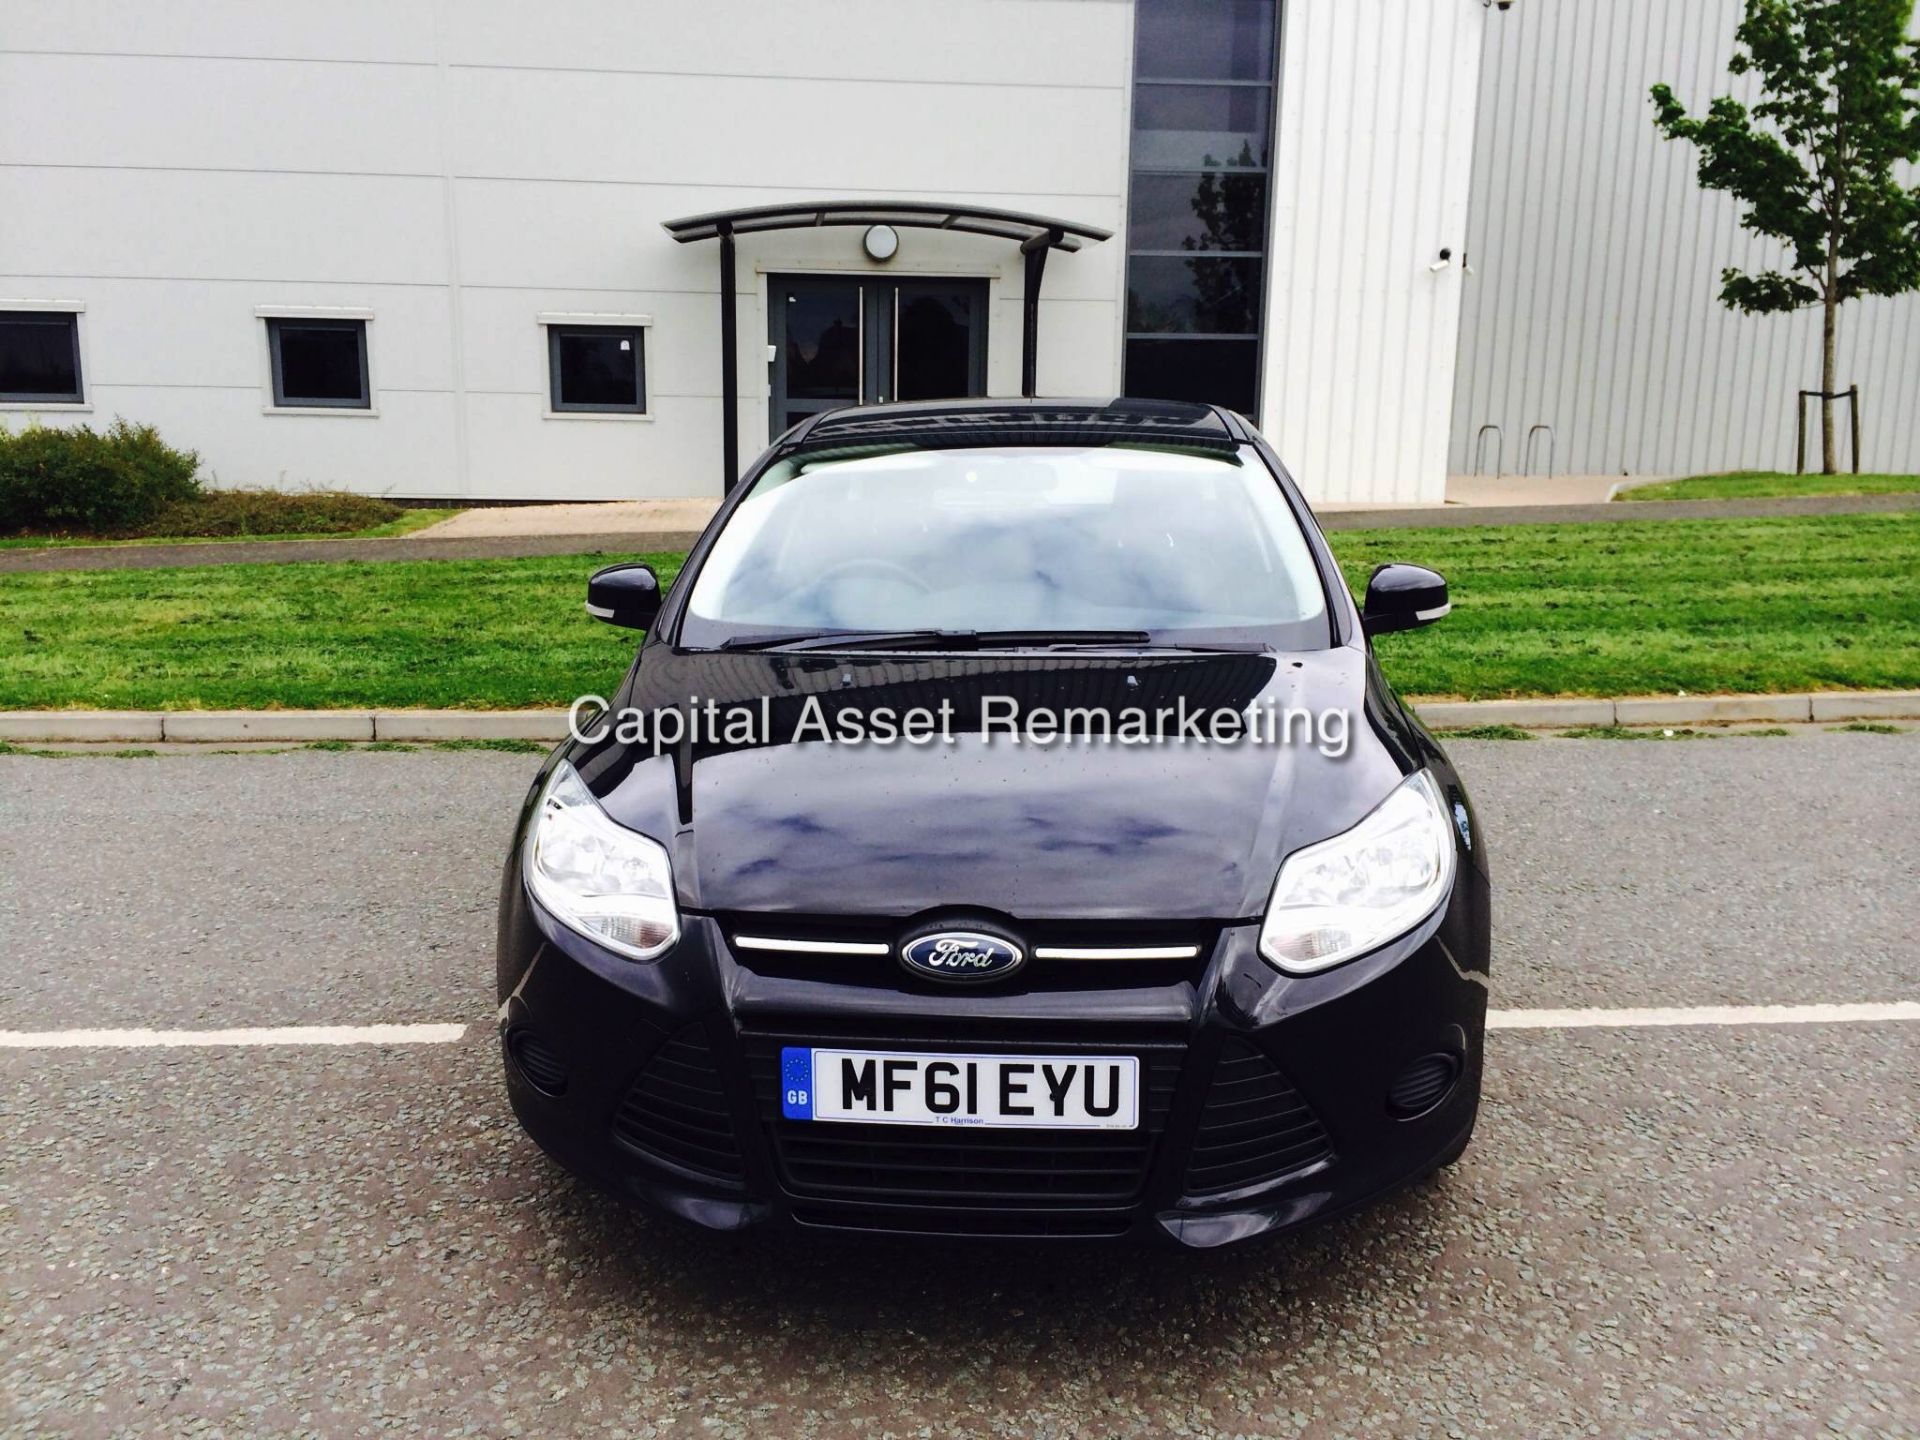 FORD FOCUS 1.6 TDCI 'EDGE' 5 DOOR HATCHBACK (2011 - 61 REG)  **1 COMPANY OWNER FROM NEW** - Image 2 of 16